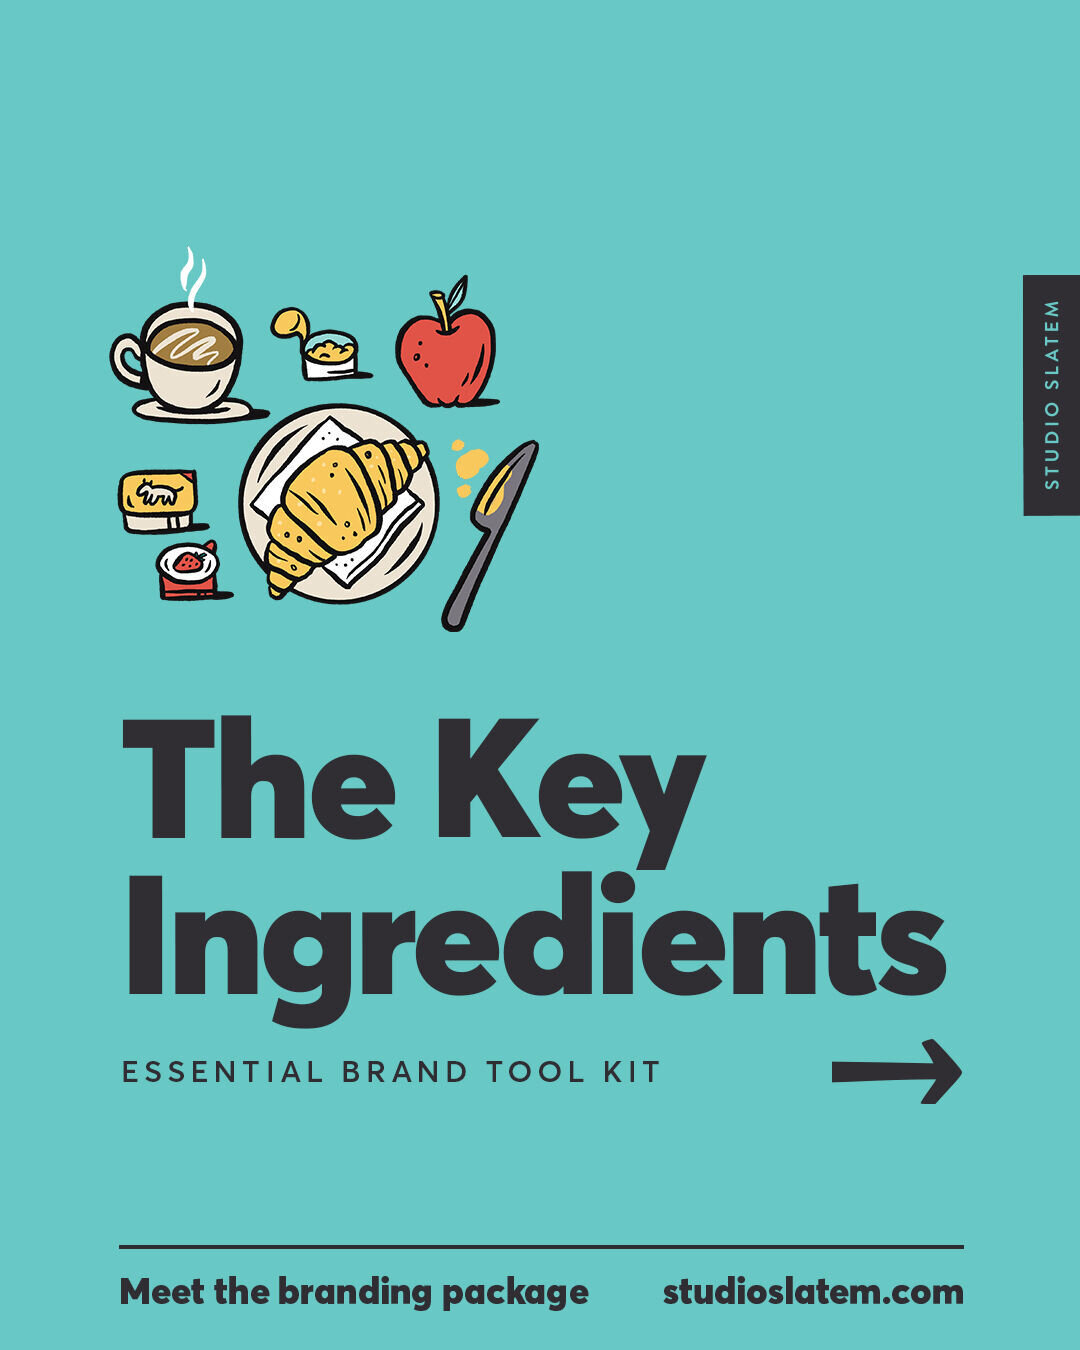 Second up is the essential brand tool kit, &quot;The Key Ingredients&quot; - the must-haves of branding tools to grow a dynamic brand packed with personality and functionality.

When starting out on your branding journey as a business owner, whether 